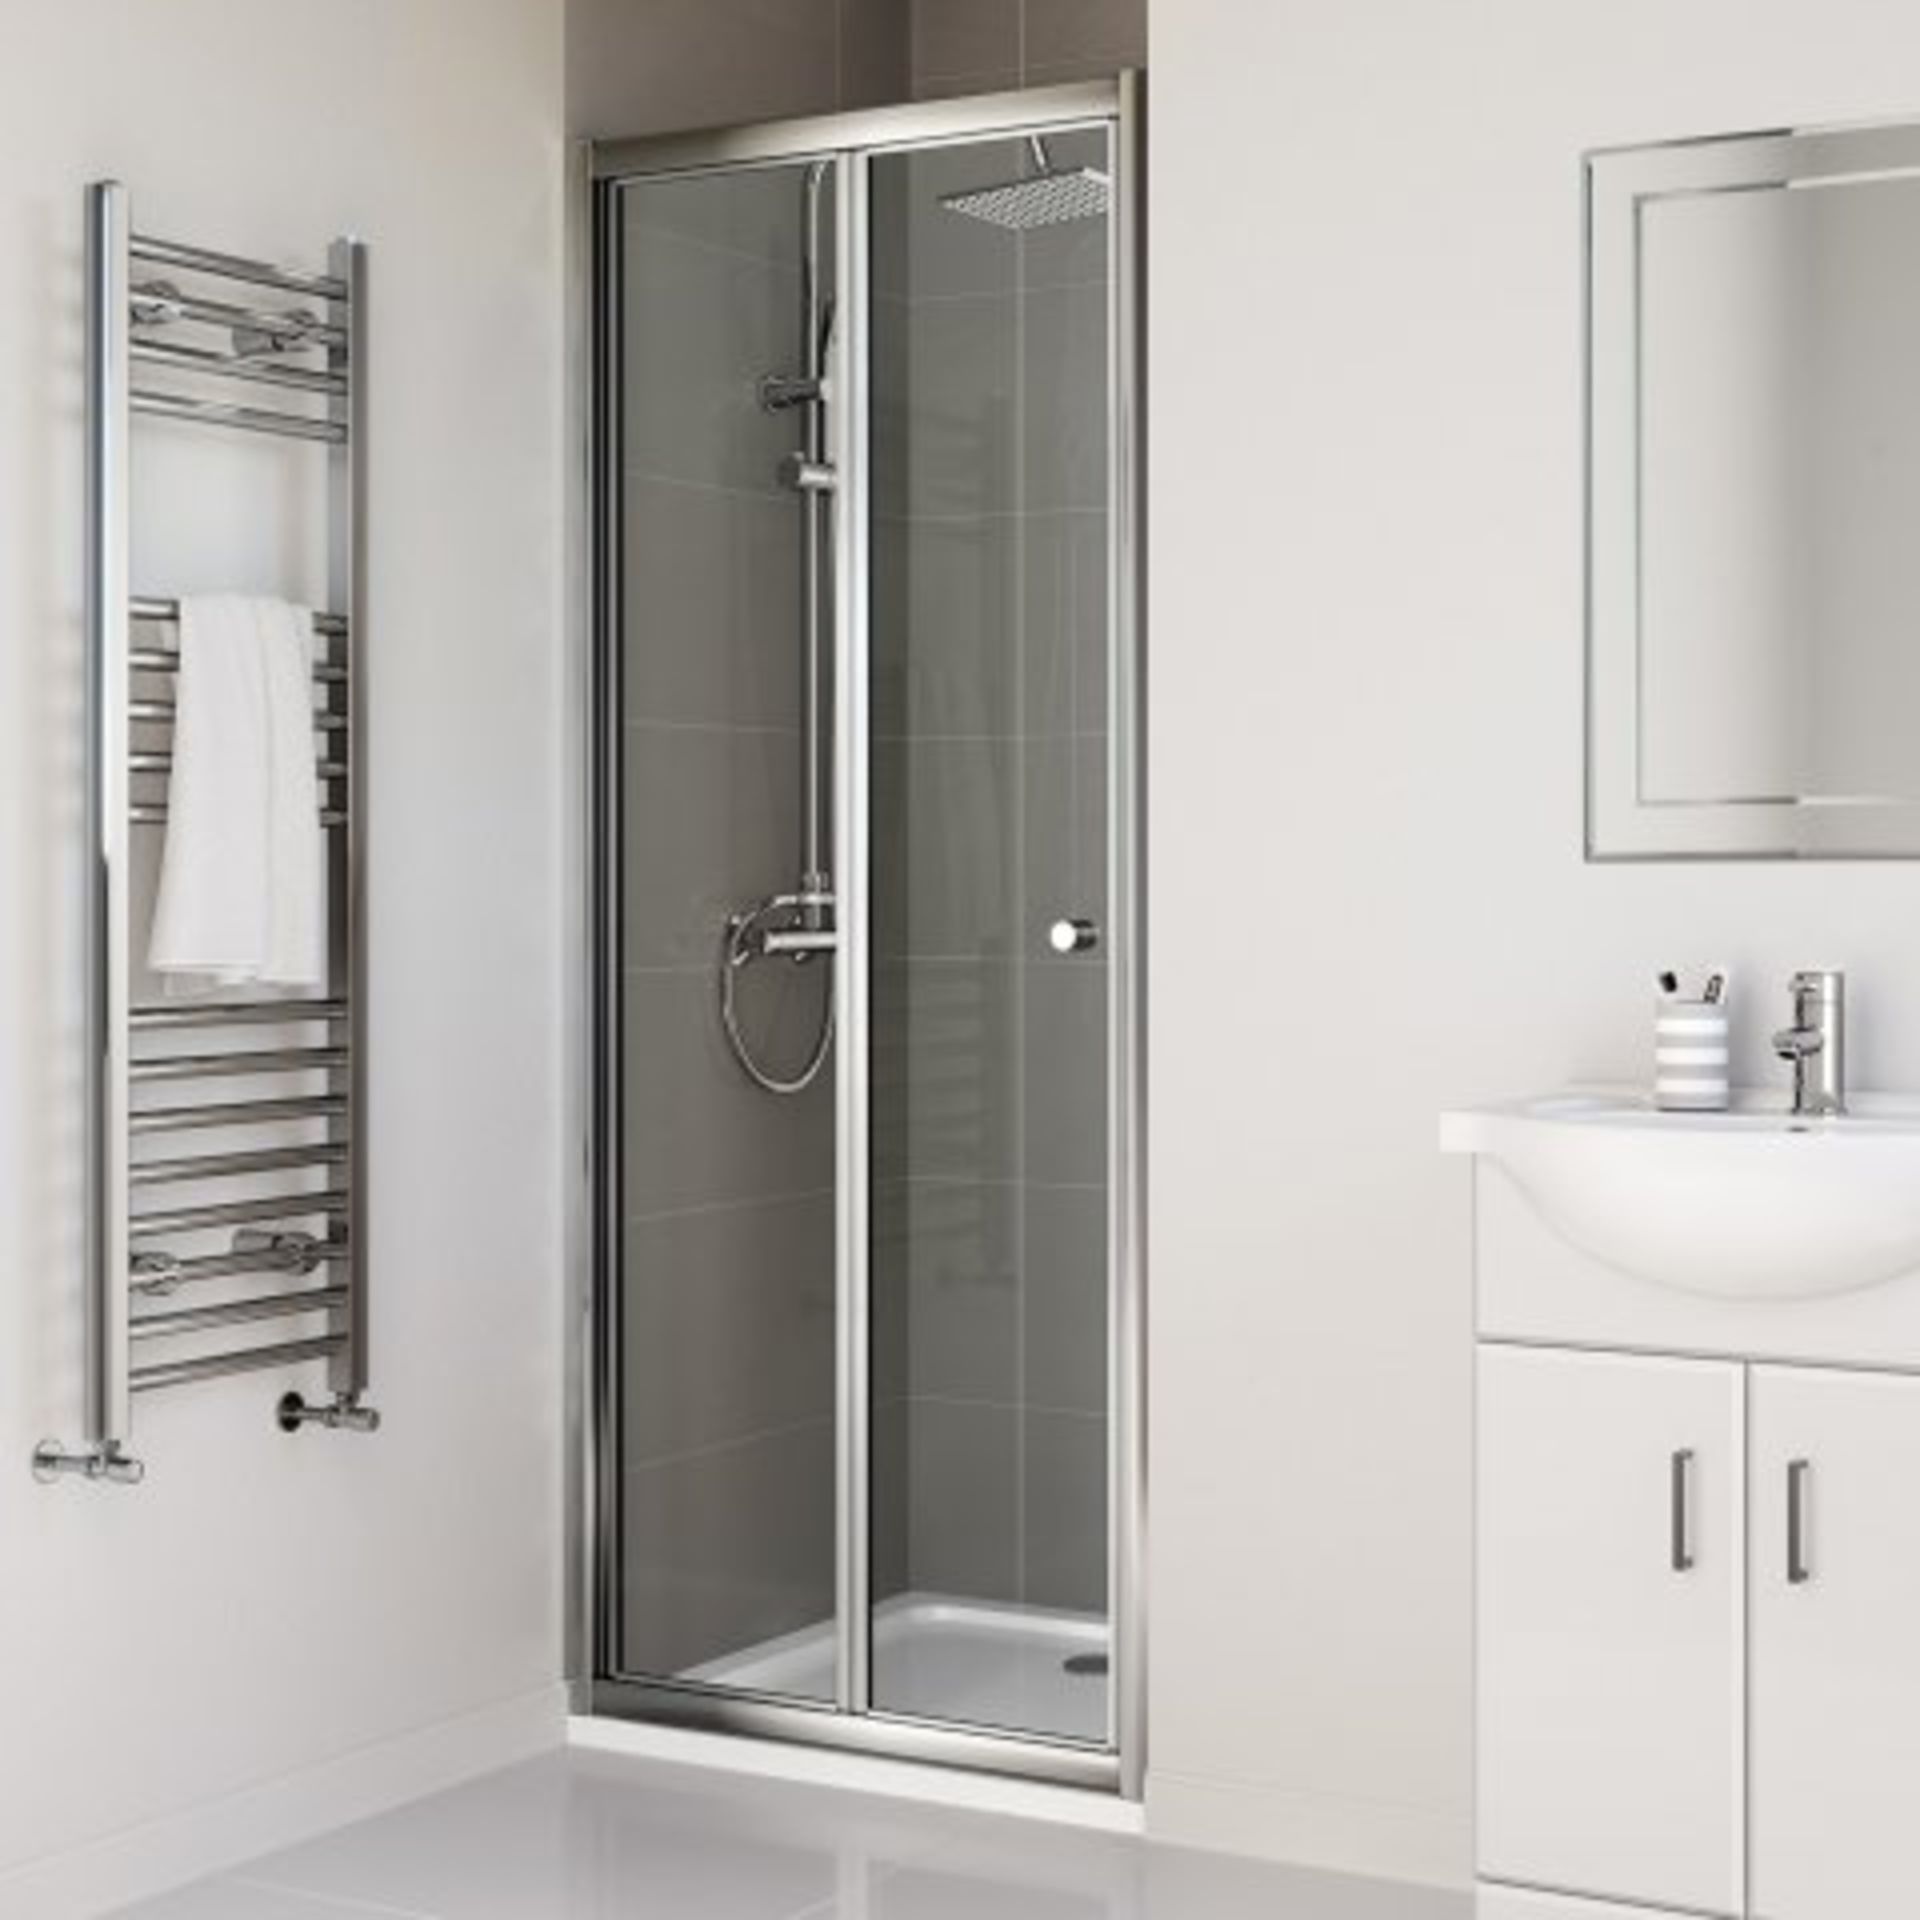 (H246) 800mm - Elements Bi Fold Shower Door. RRP £299.99. Do you have an awkward nook or a tricky